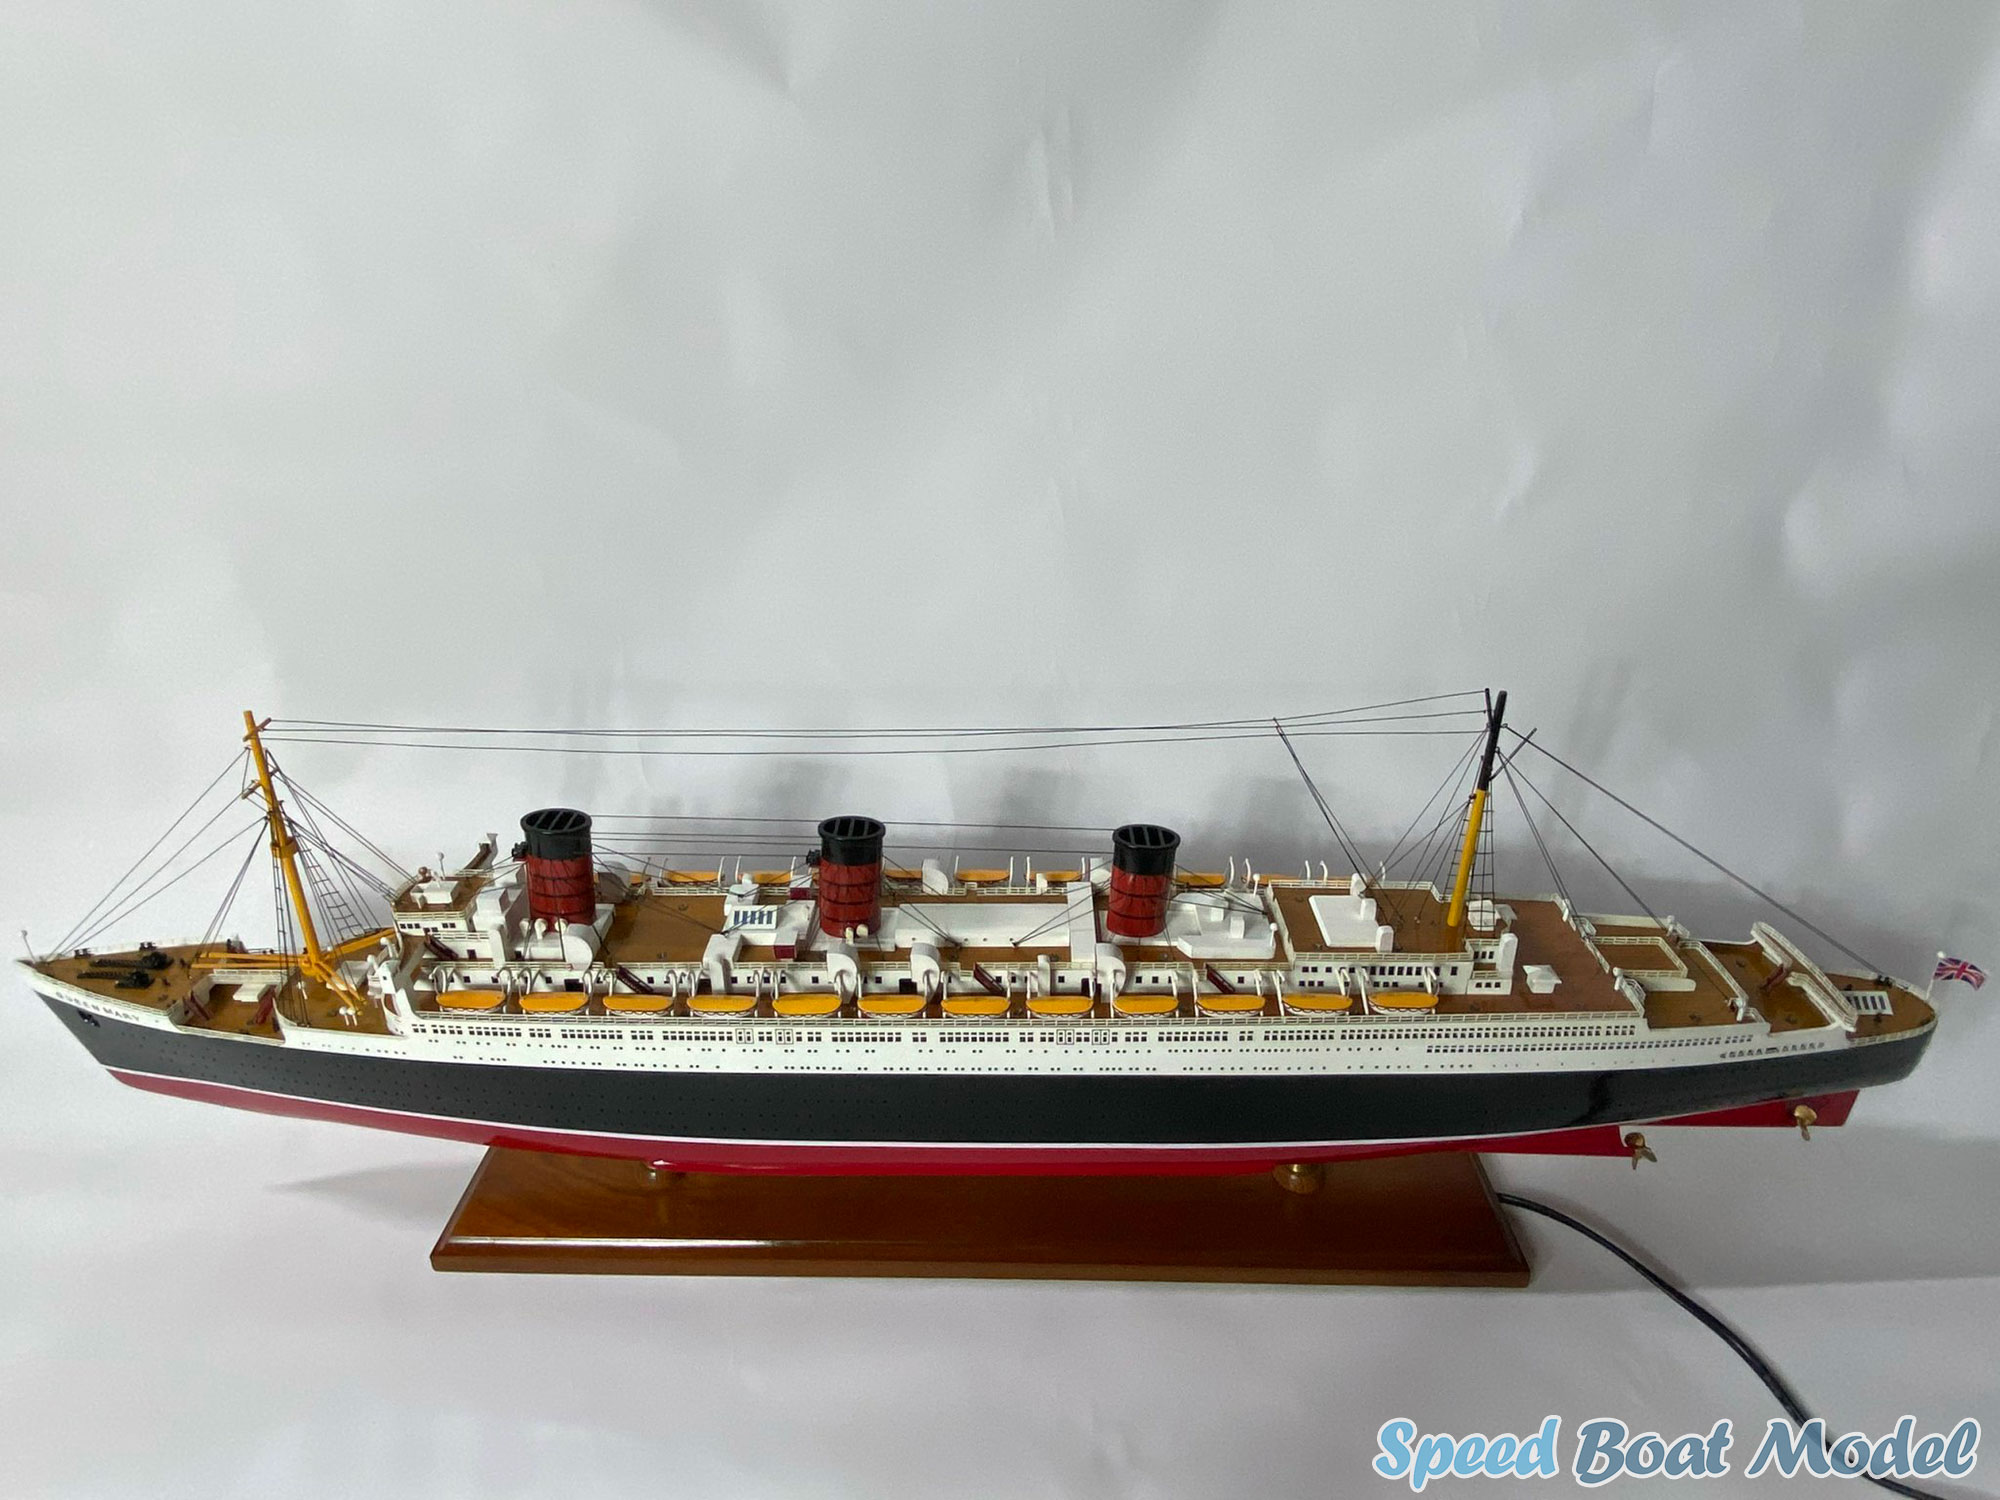 Rms Queen Mary Cruise Liner Model 39.7"